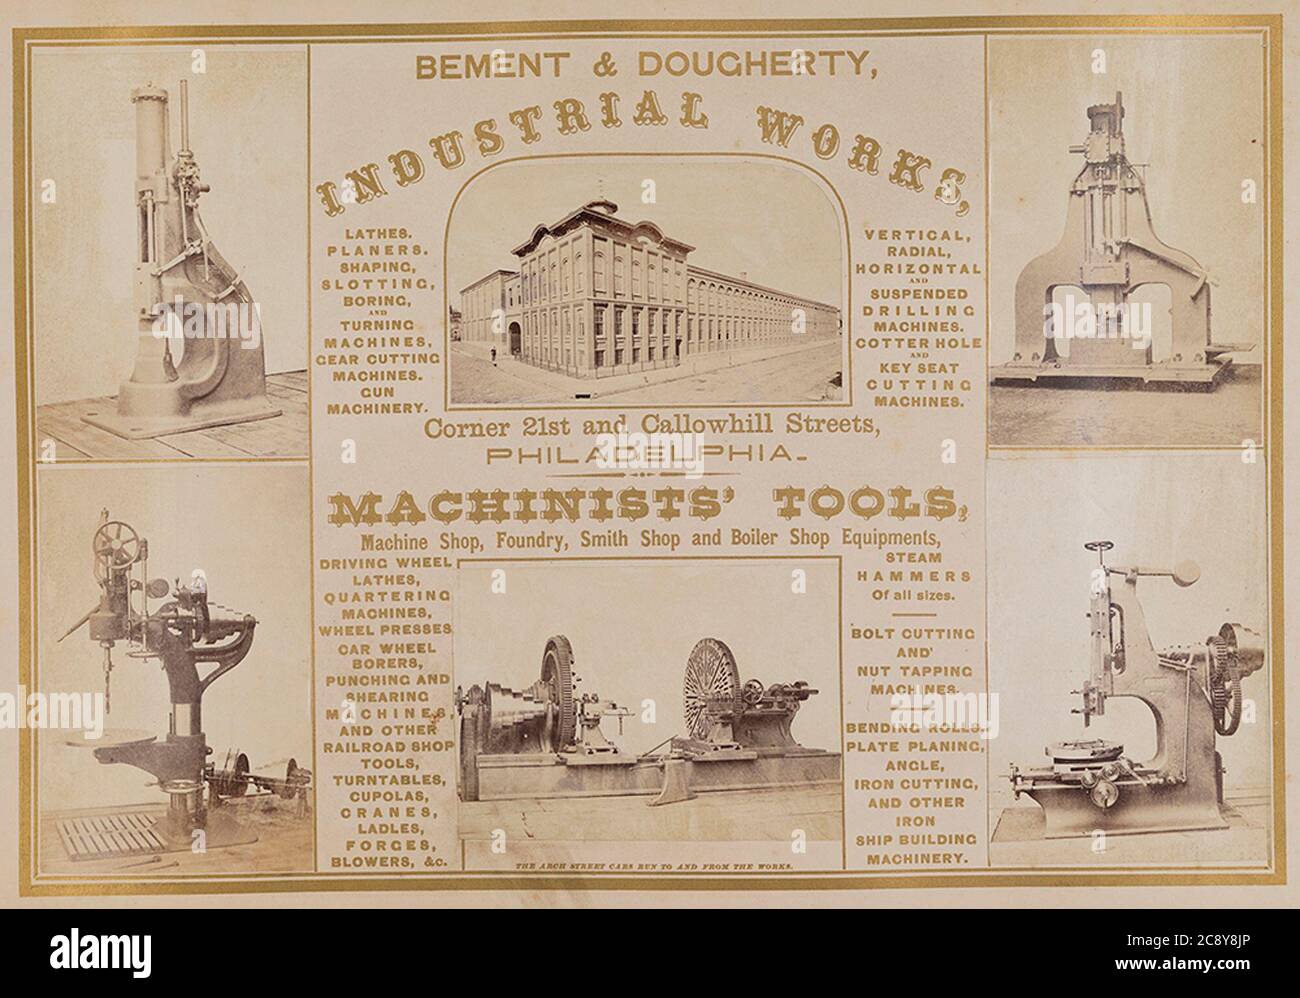 Bement & Dougherty, Industrial Works, Machinists' Tools by SMU Libraries Digital Collections Stock Photo